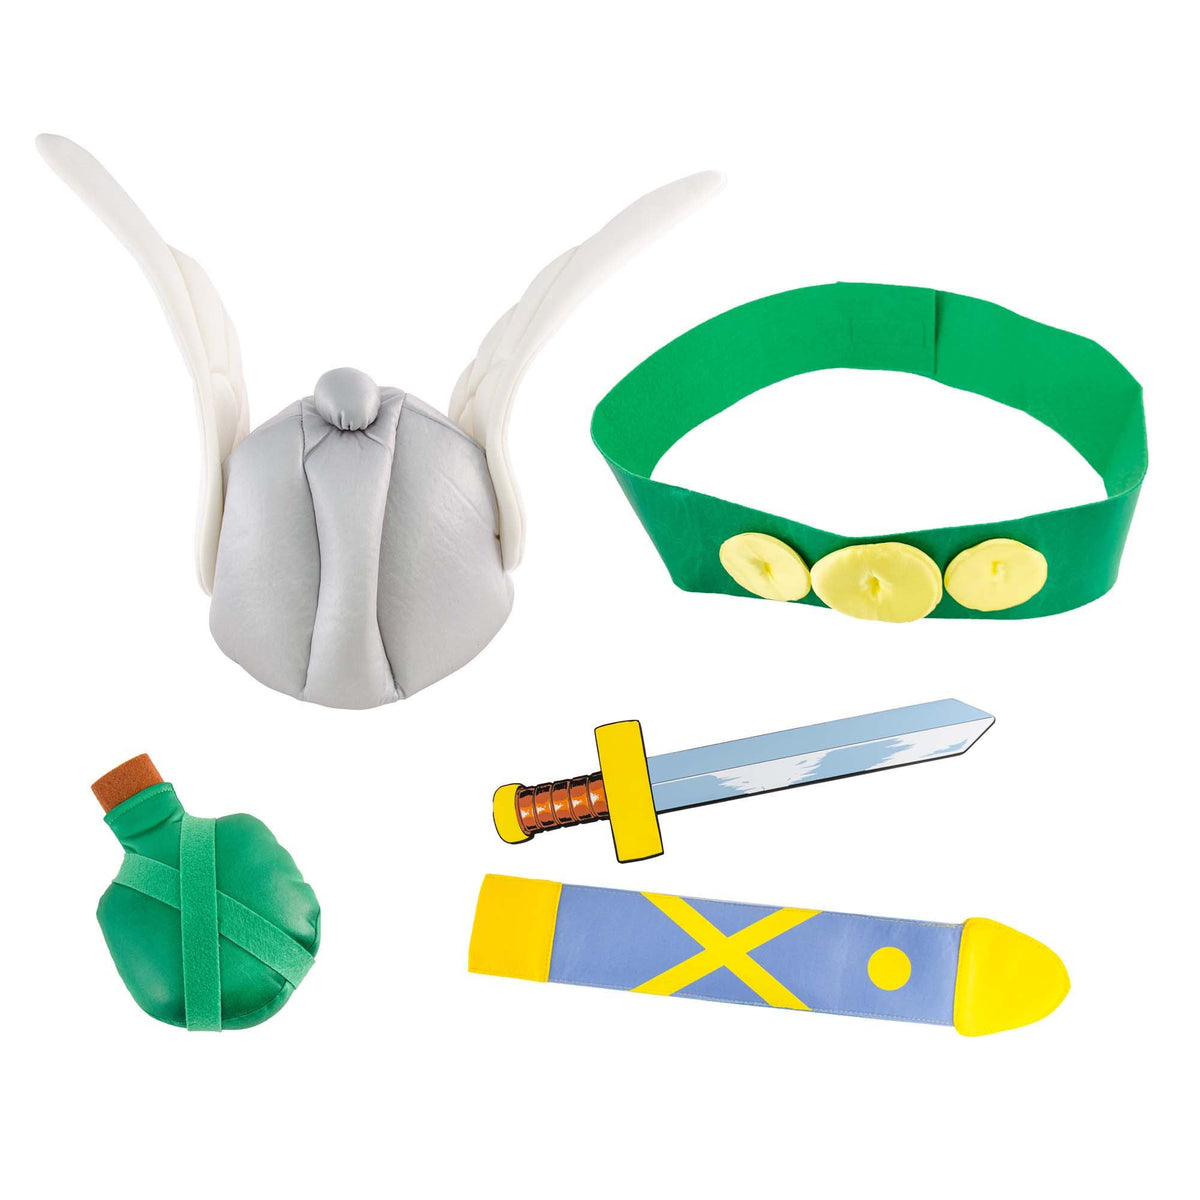 CHAKS Costumes Asterix Costume Kit for Kids, Asterix and Obelix